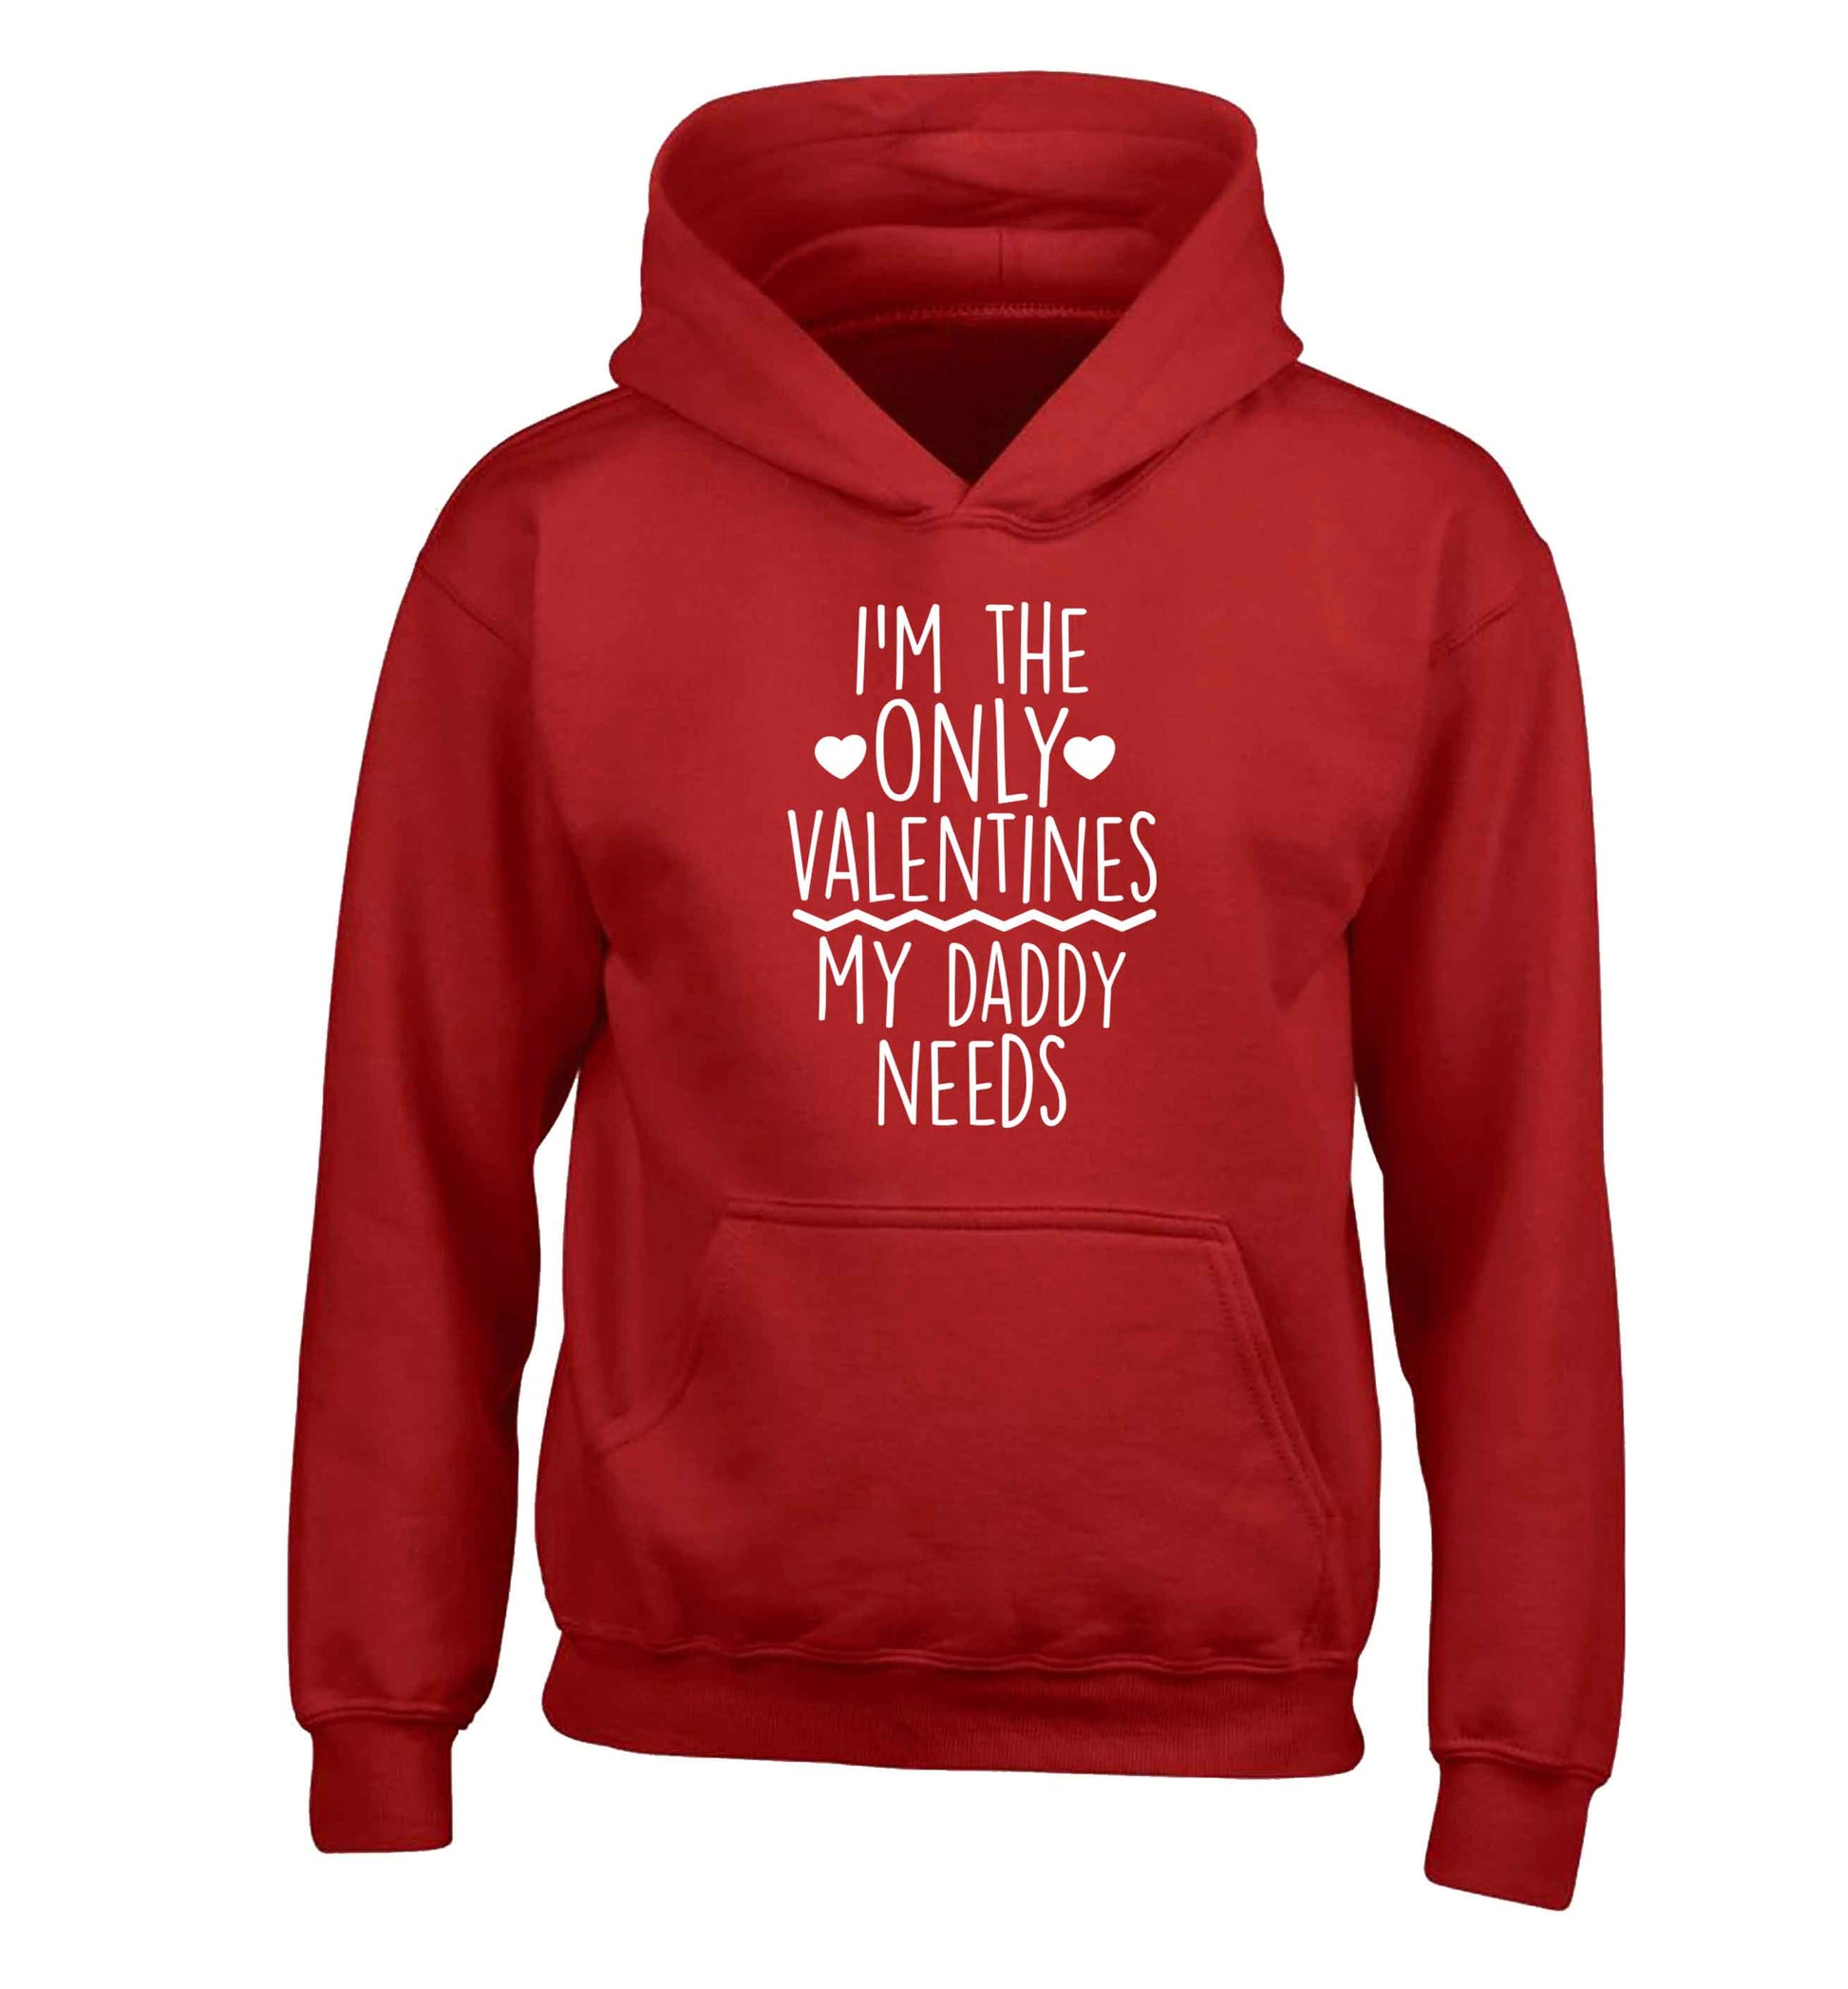 I'm the only valentines my daddy needs children's red hoodie 12-13 Years